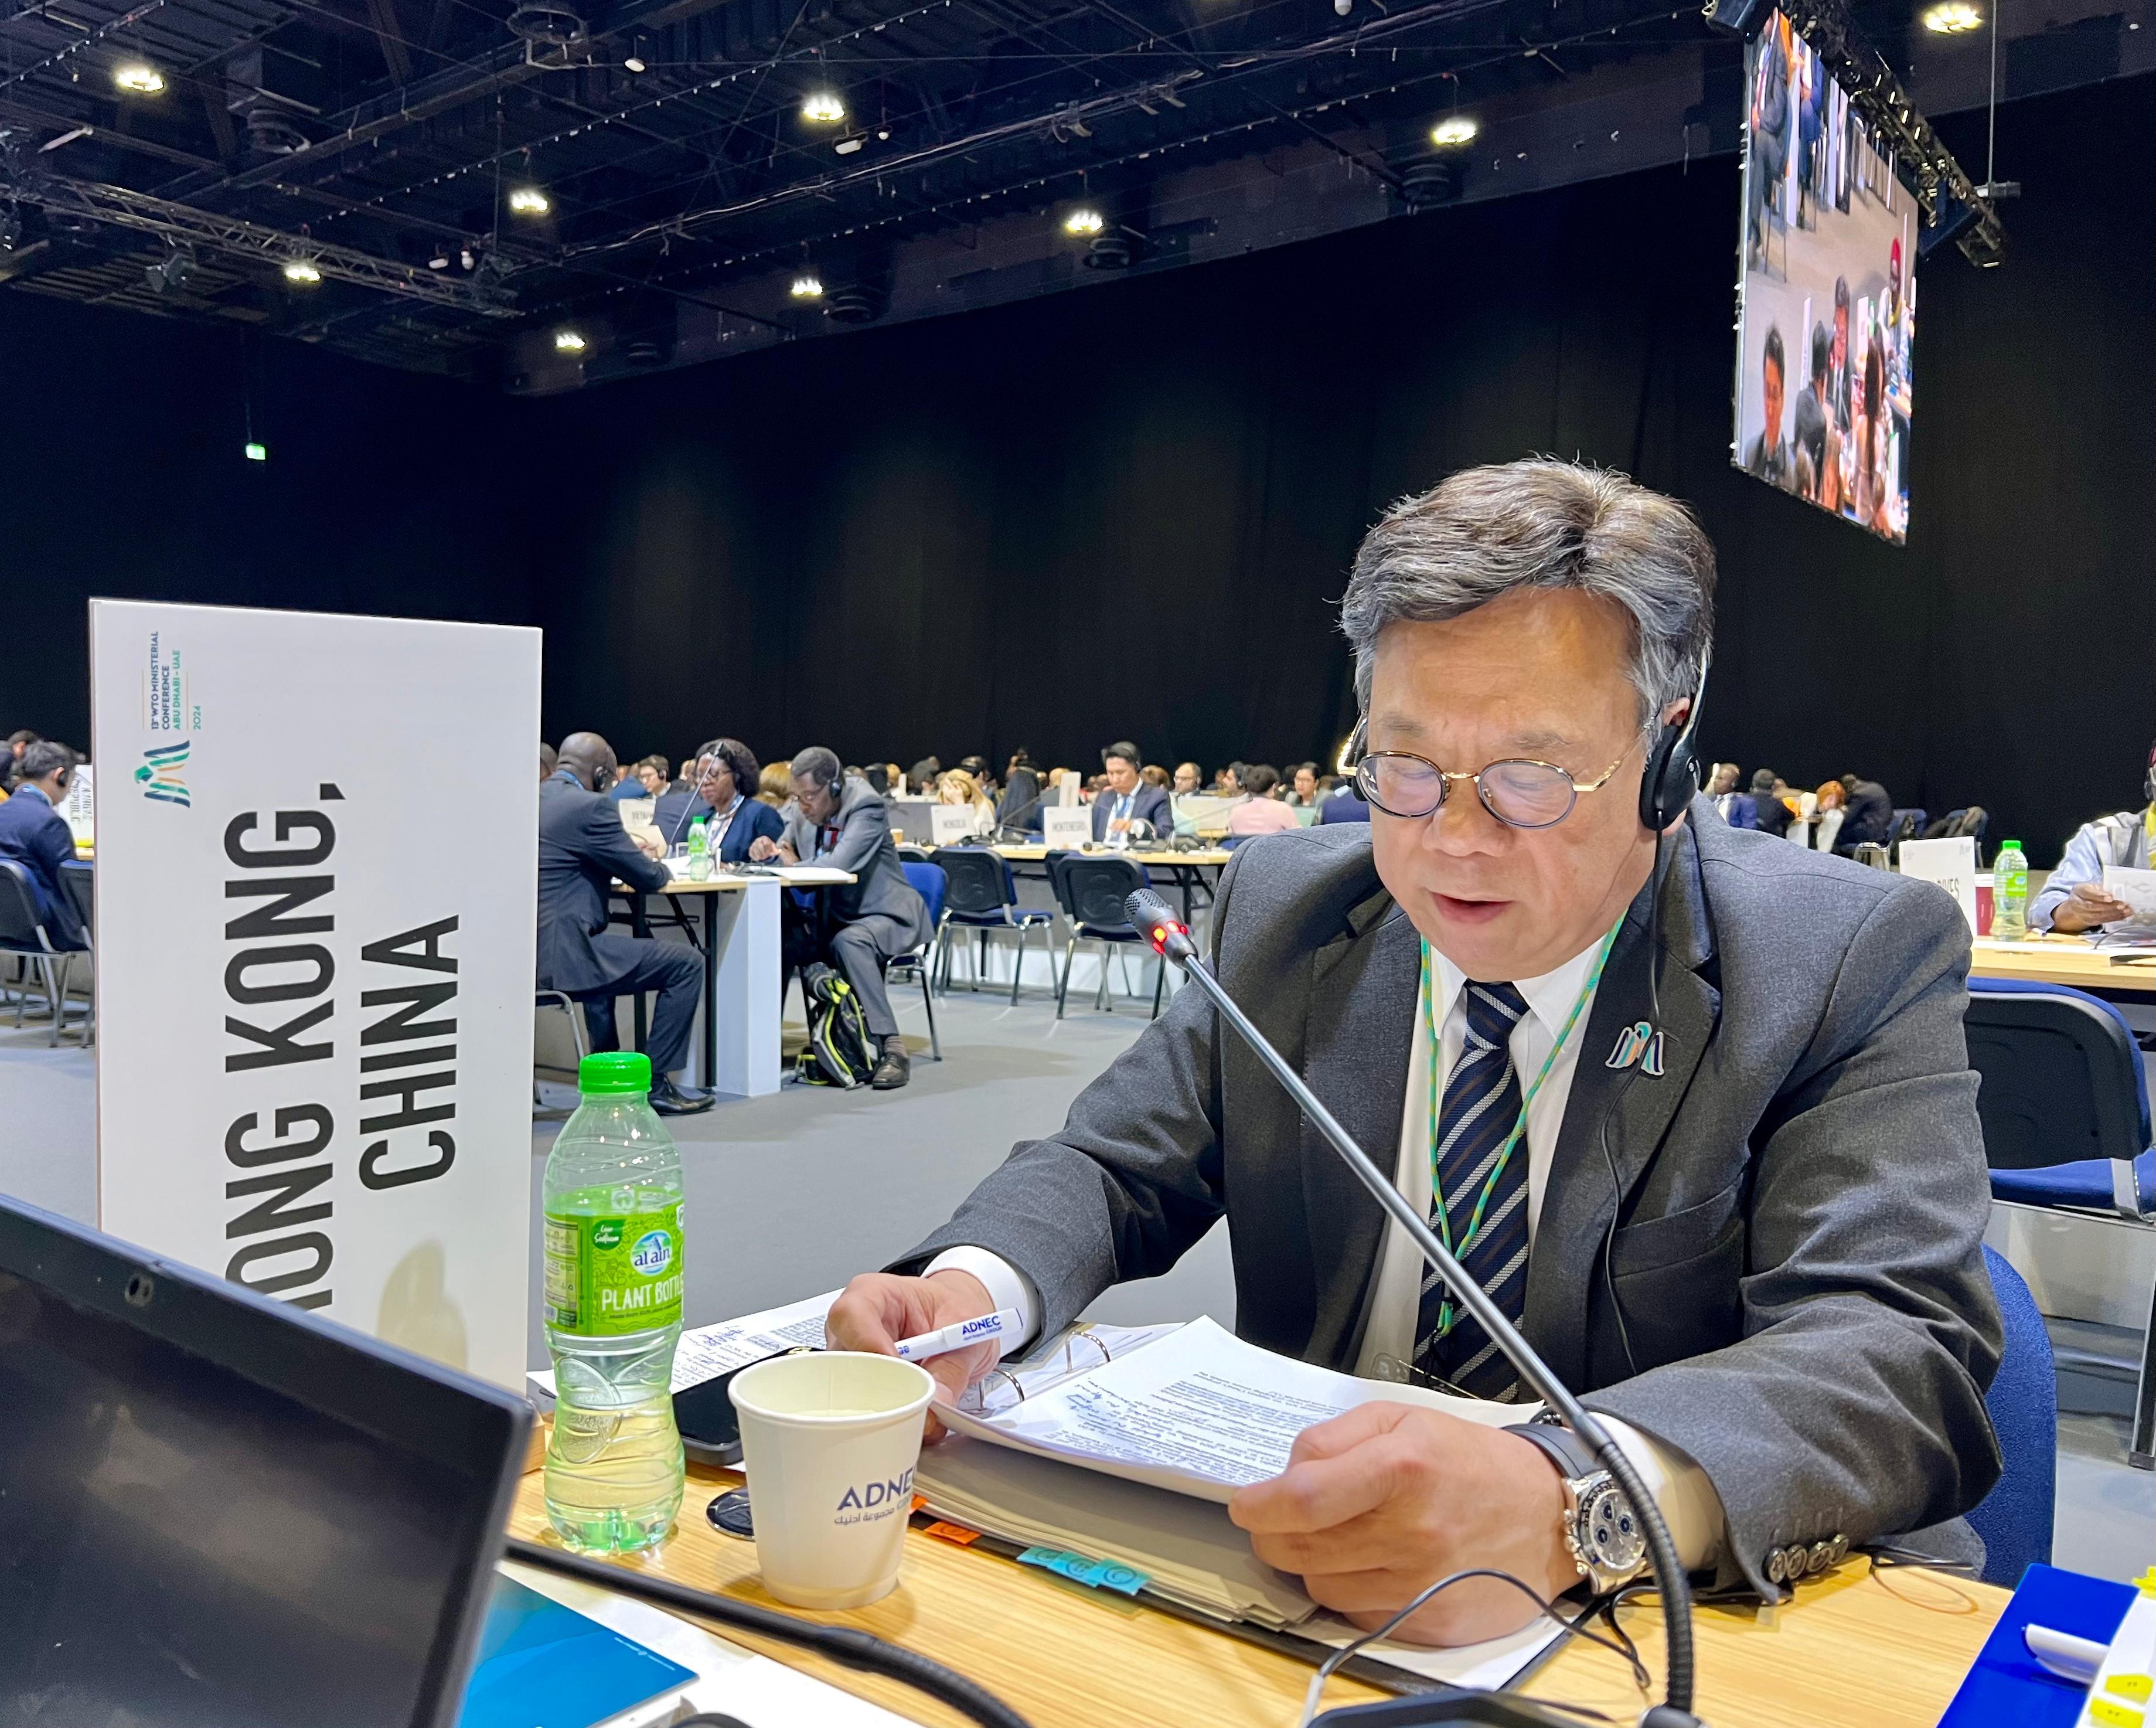 The Secretary for Commerce and Economic Development, Mr Algernon Yau, spoke at a meeting on dispute settlement reform during the 13th World Trade Organization Ministerial Conference in Abu Dhabi, the United Arab Emirates, on February 28 (Abu Dhabi time).